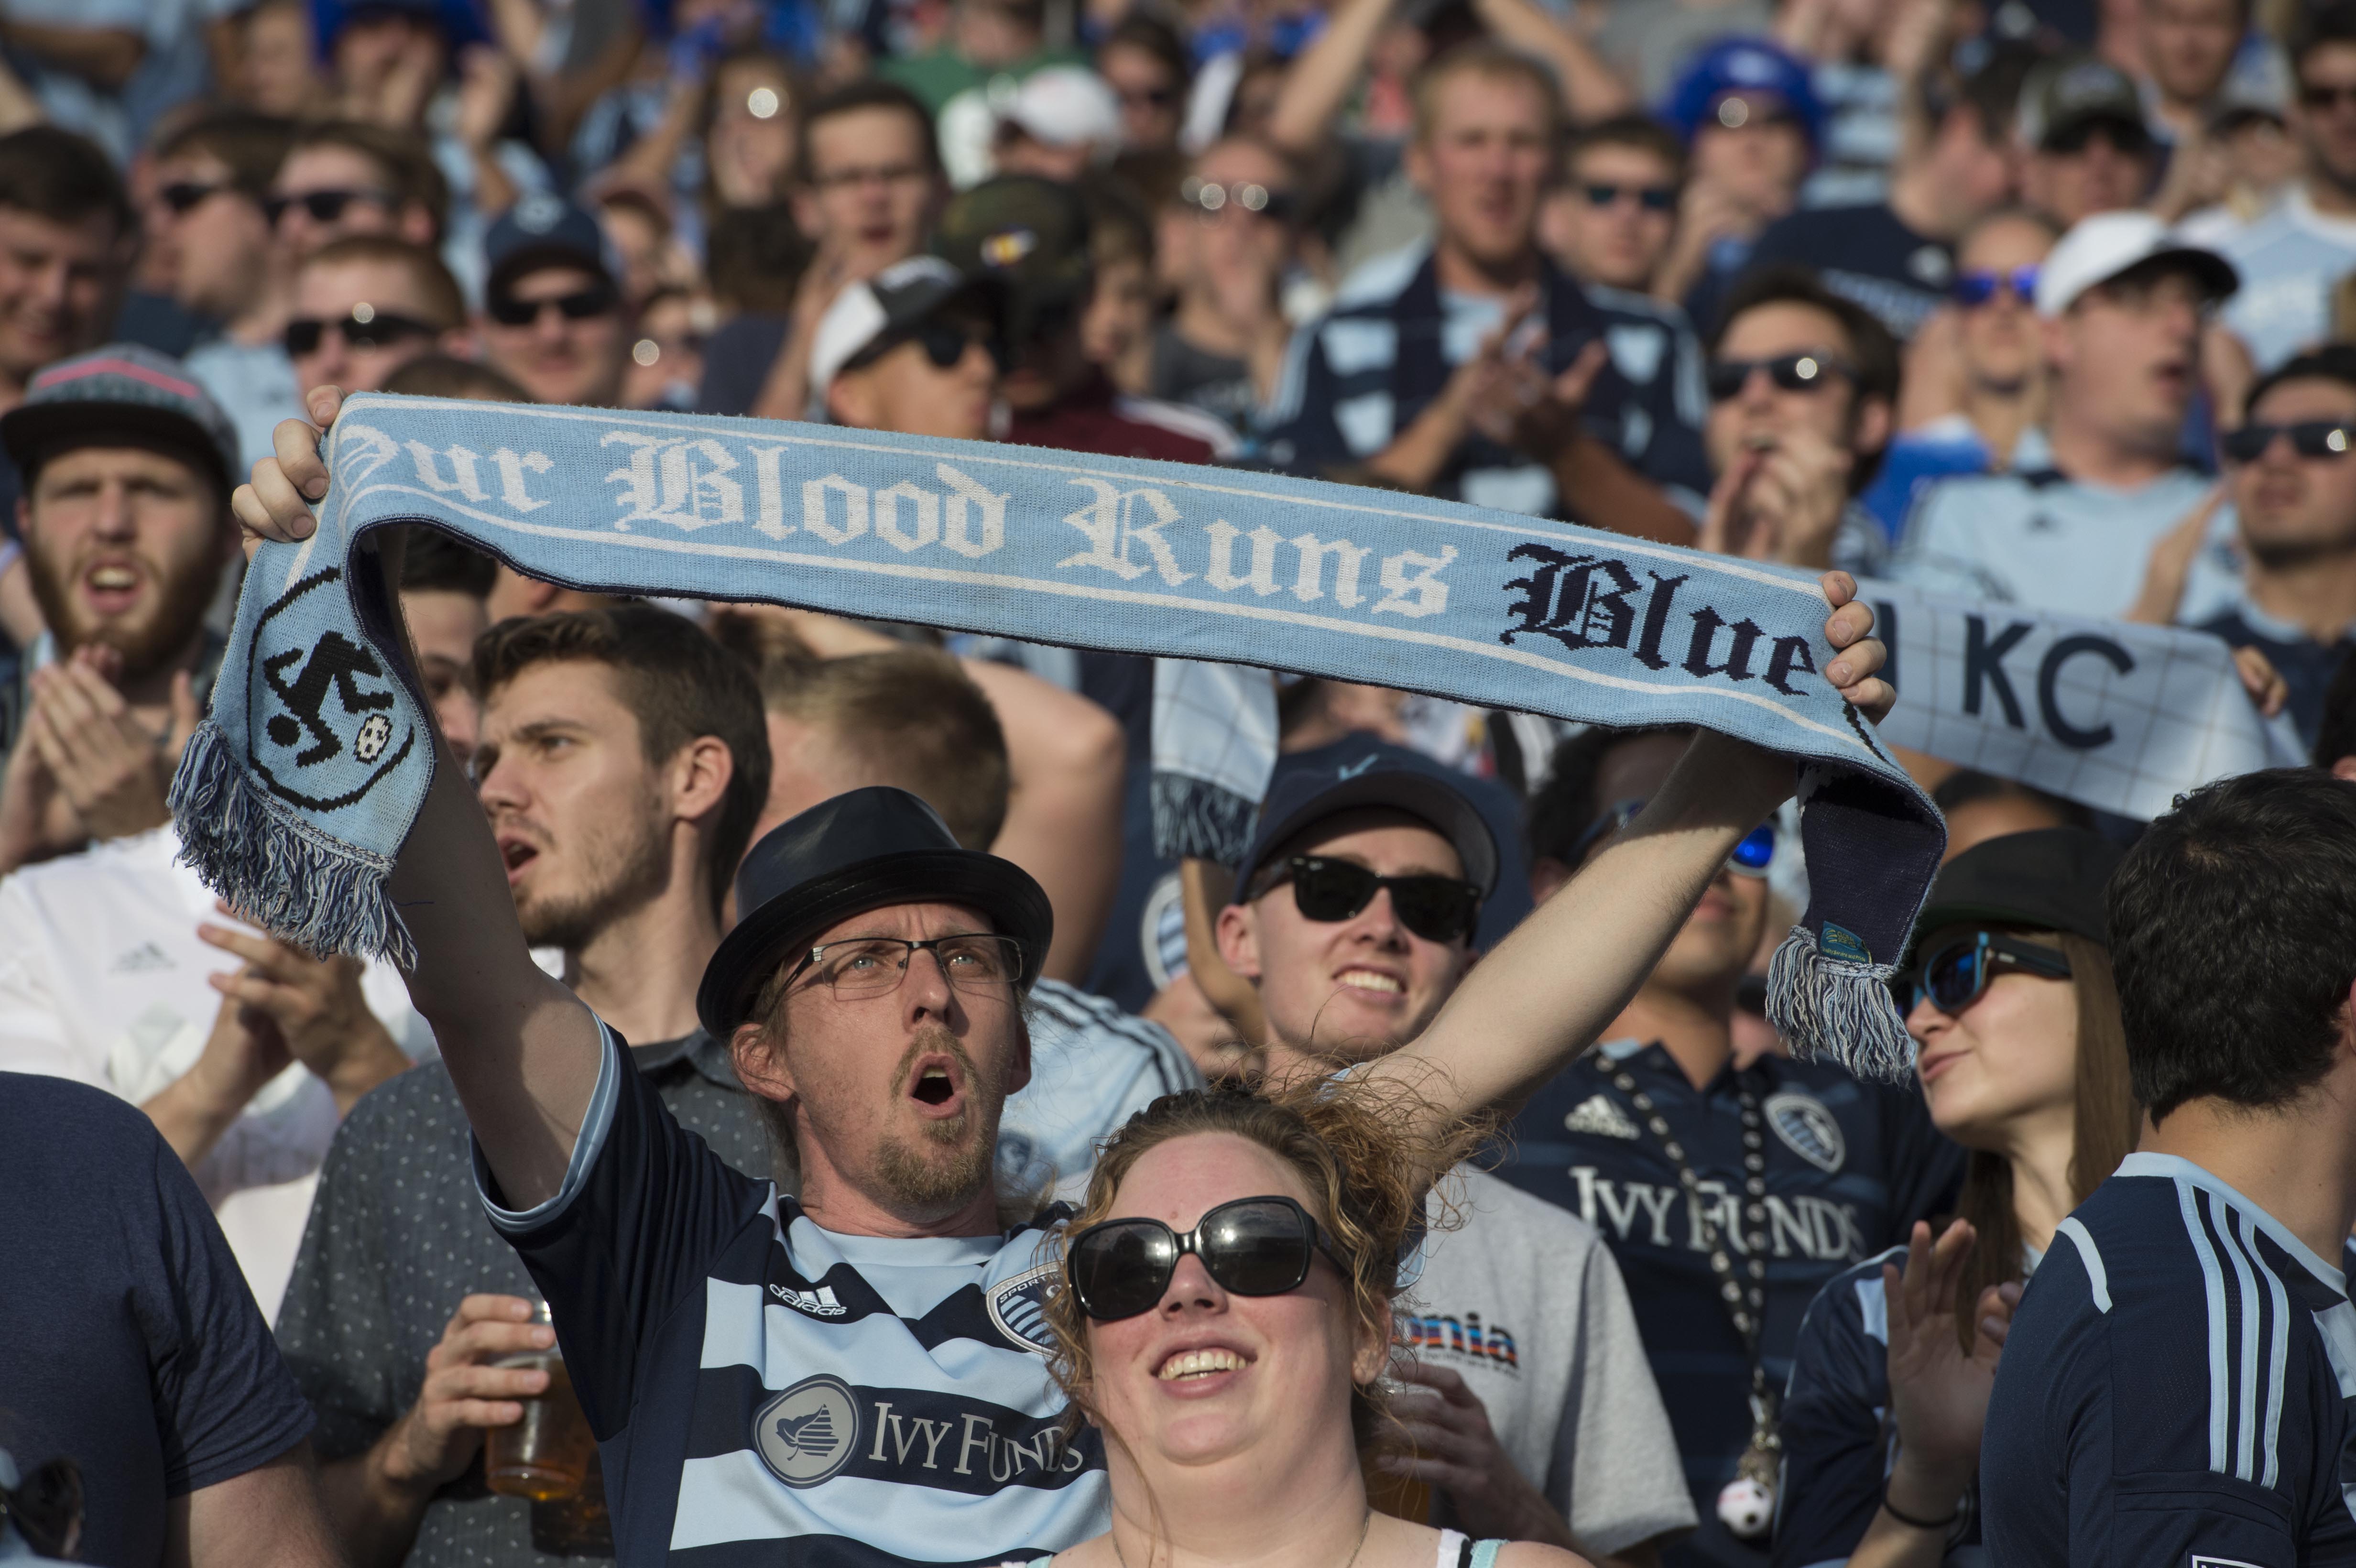 Hundreds of fans traveled to support Sporting Kansas City at Colorado